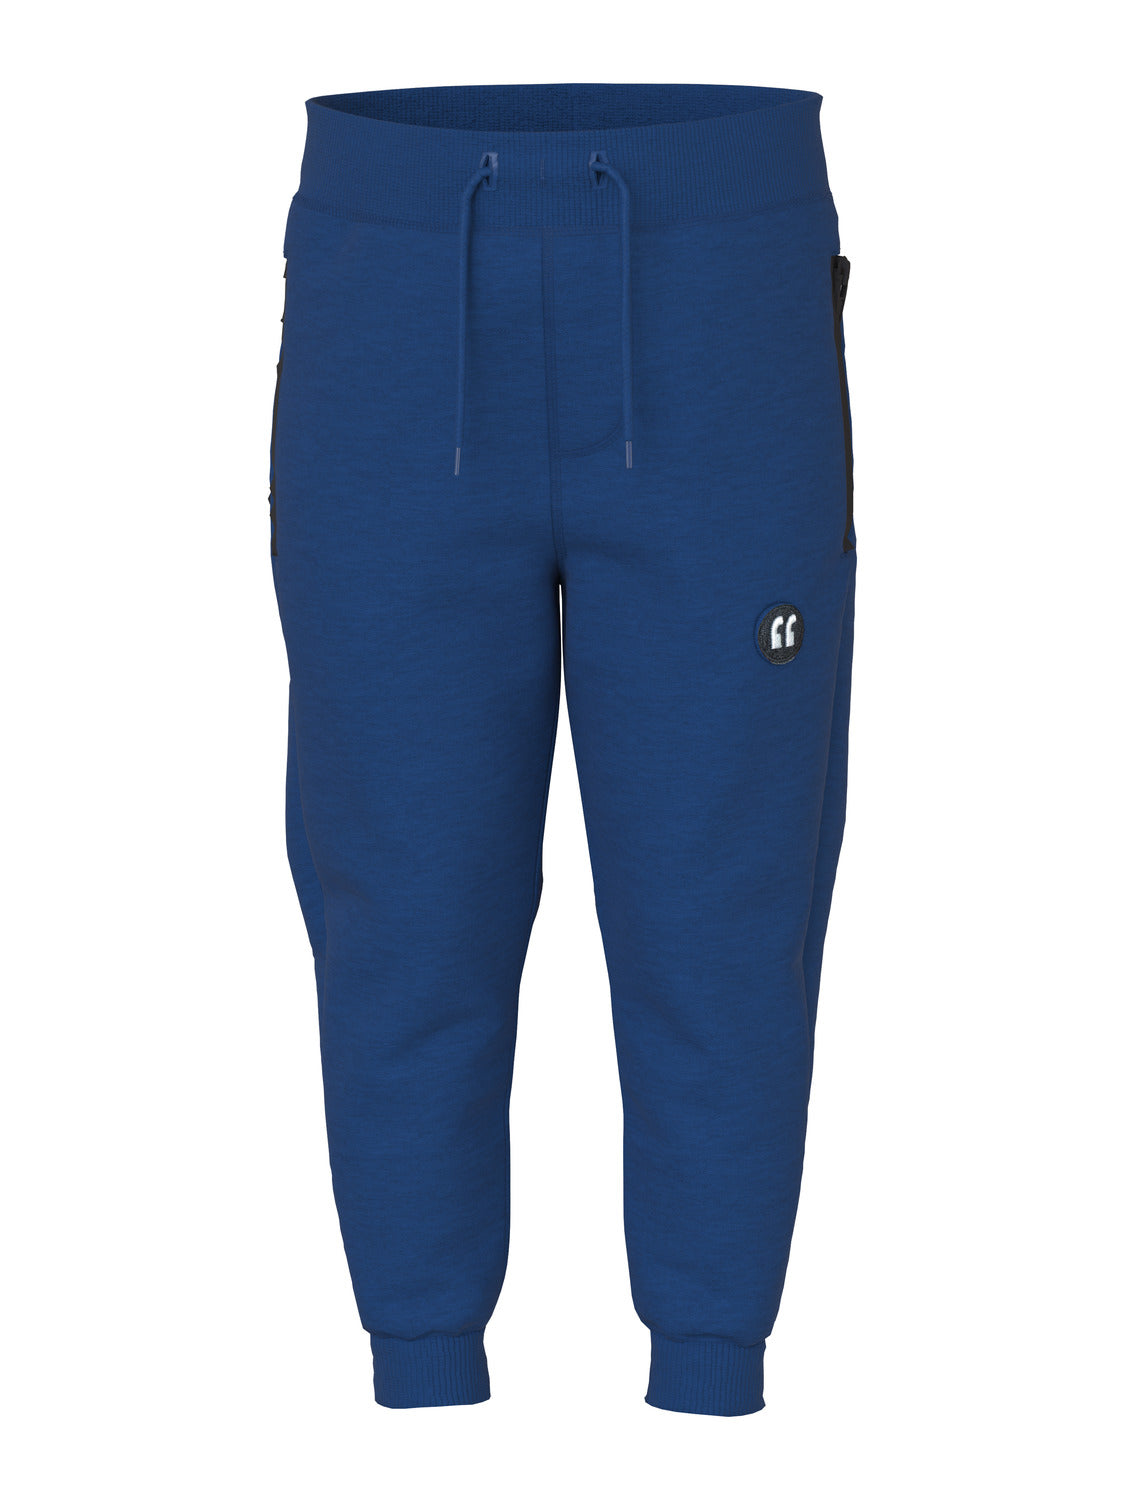 NMMVIMO Trousers - True Blue